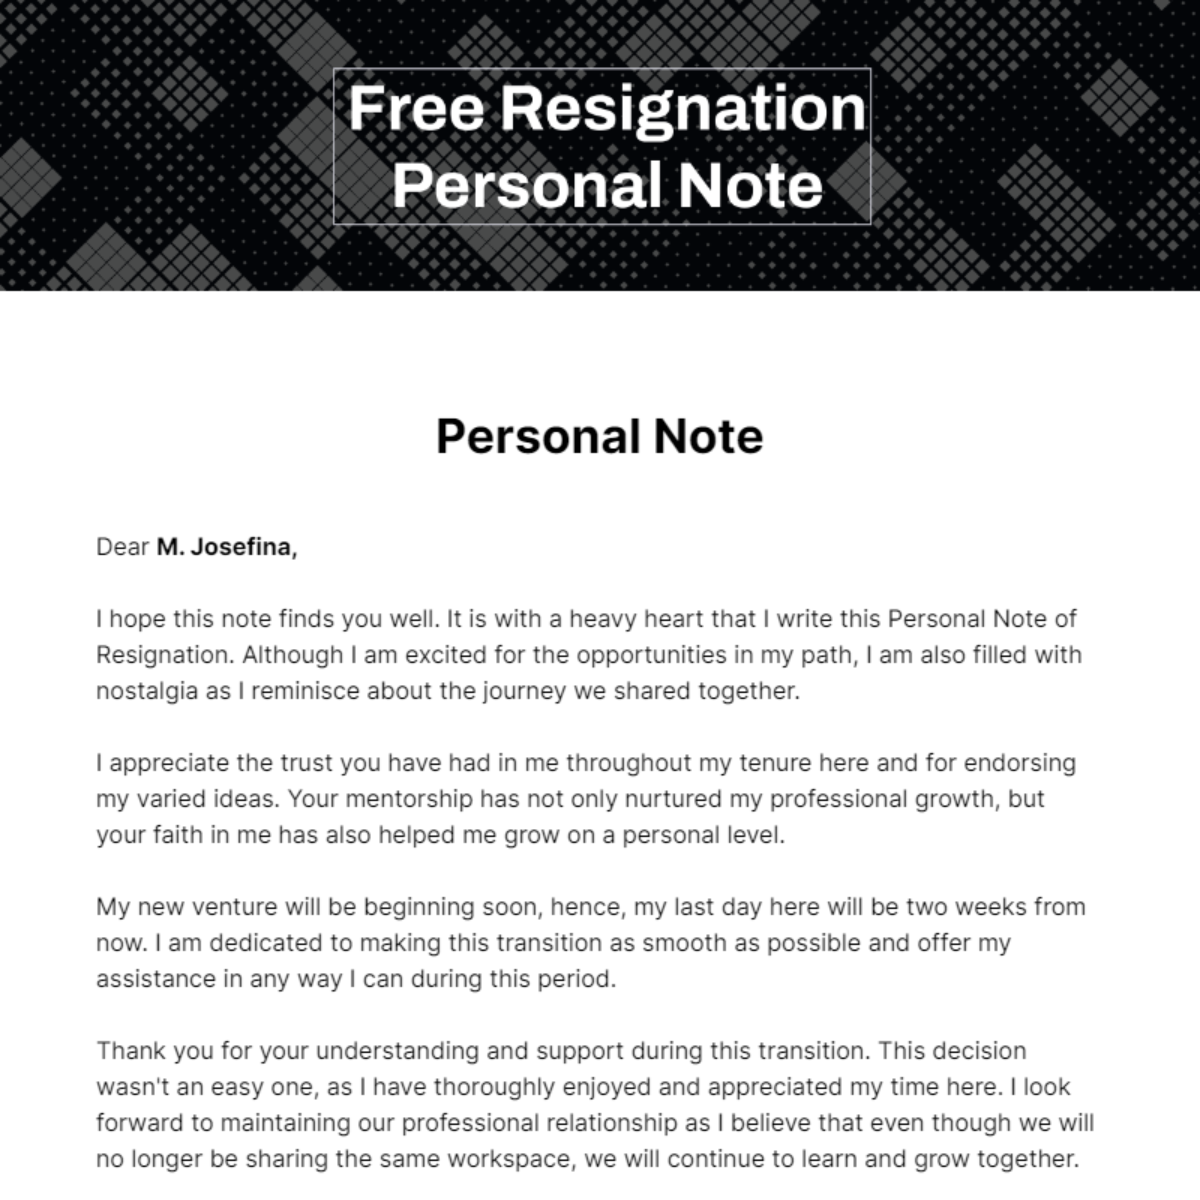 Free Resignation Personal Note Template